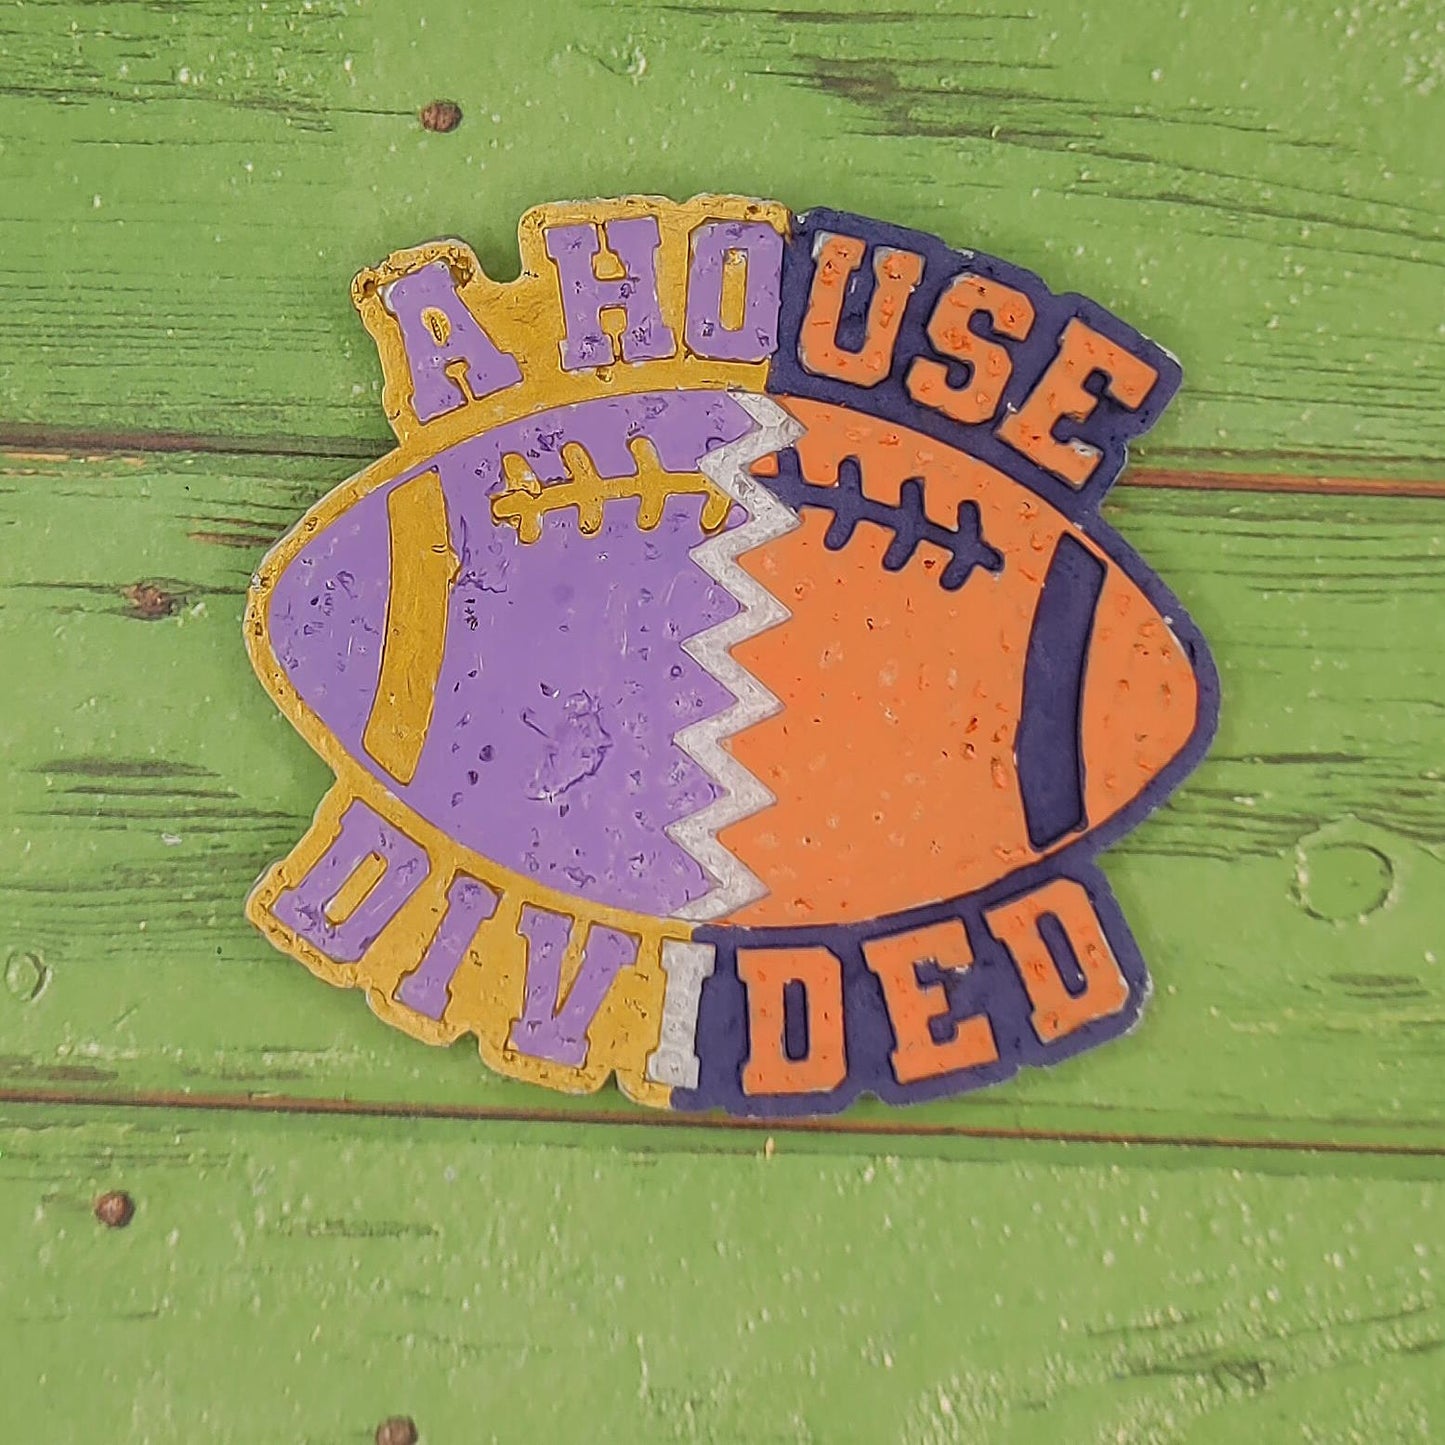 A House Divided - Football - Silicone Freshie Mold